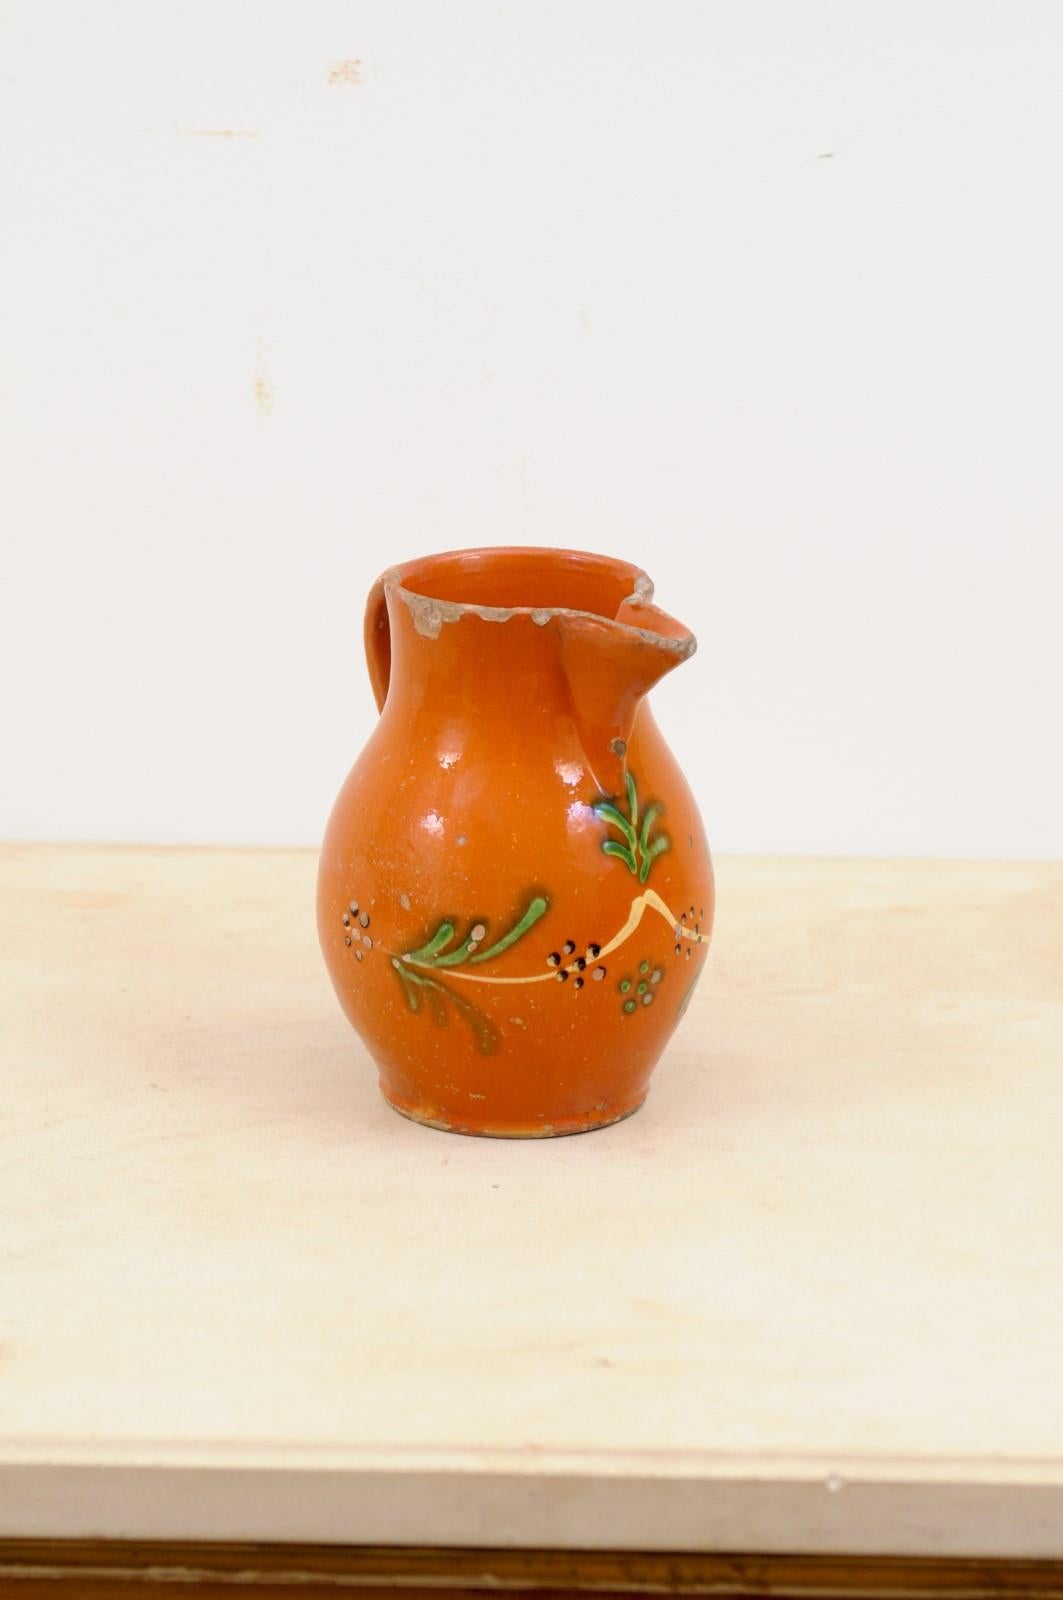 A French redware pitcher from the 19th century, with orange, cream and green glaze and floral motifs. Created in France during the 19th century, this redware pitcher charms us with its vivid colors and stylized floral motifs. Presenting a handle in